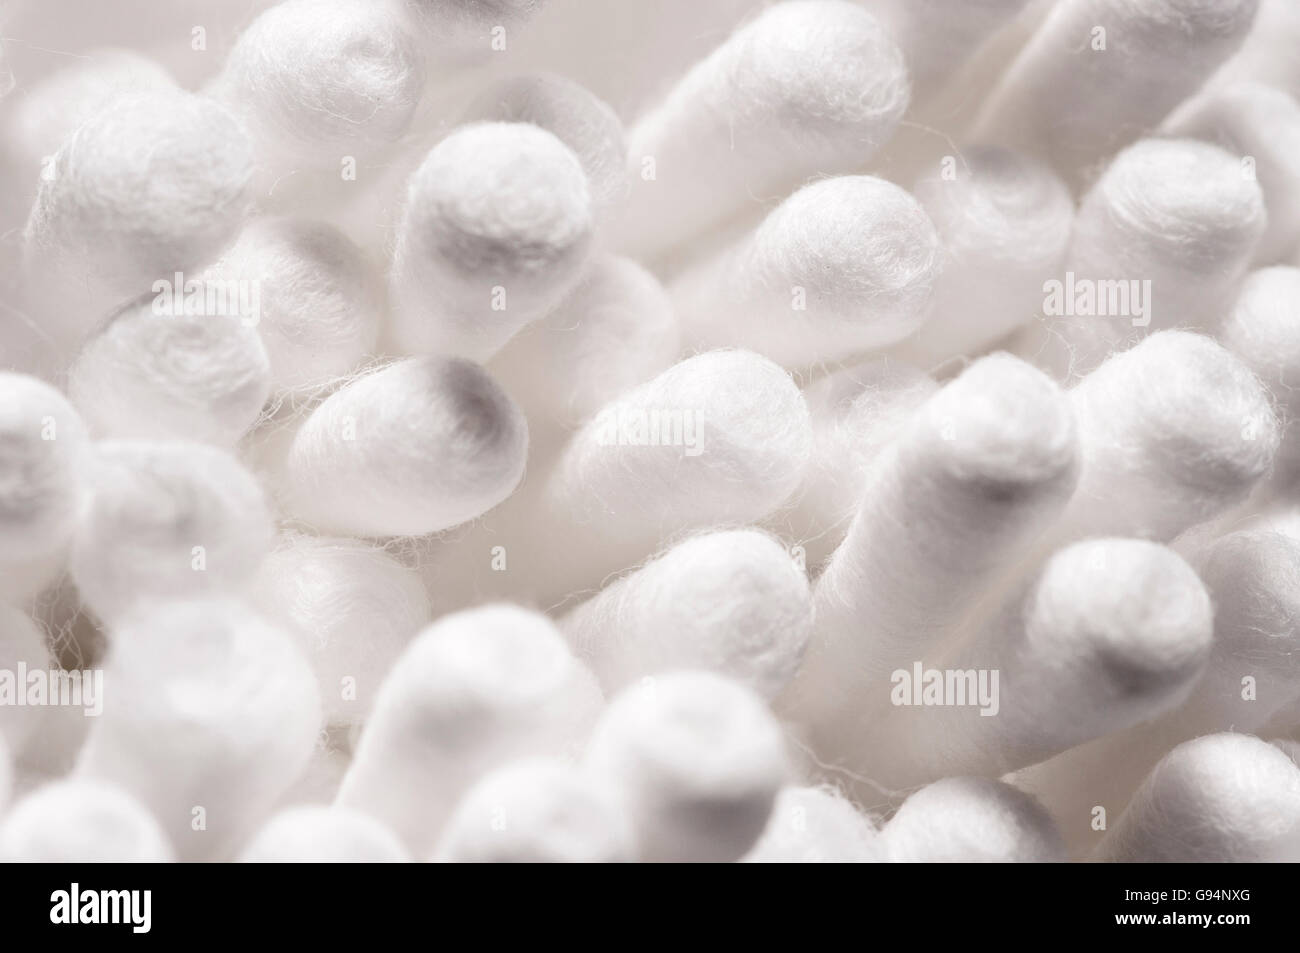 White Cotton Ear Buds Background Stock Photo